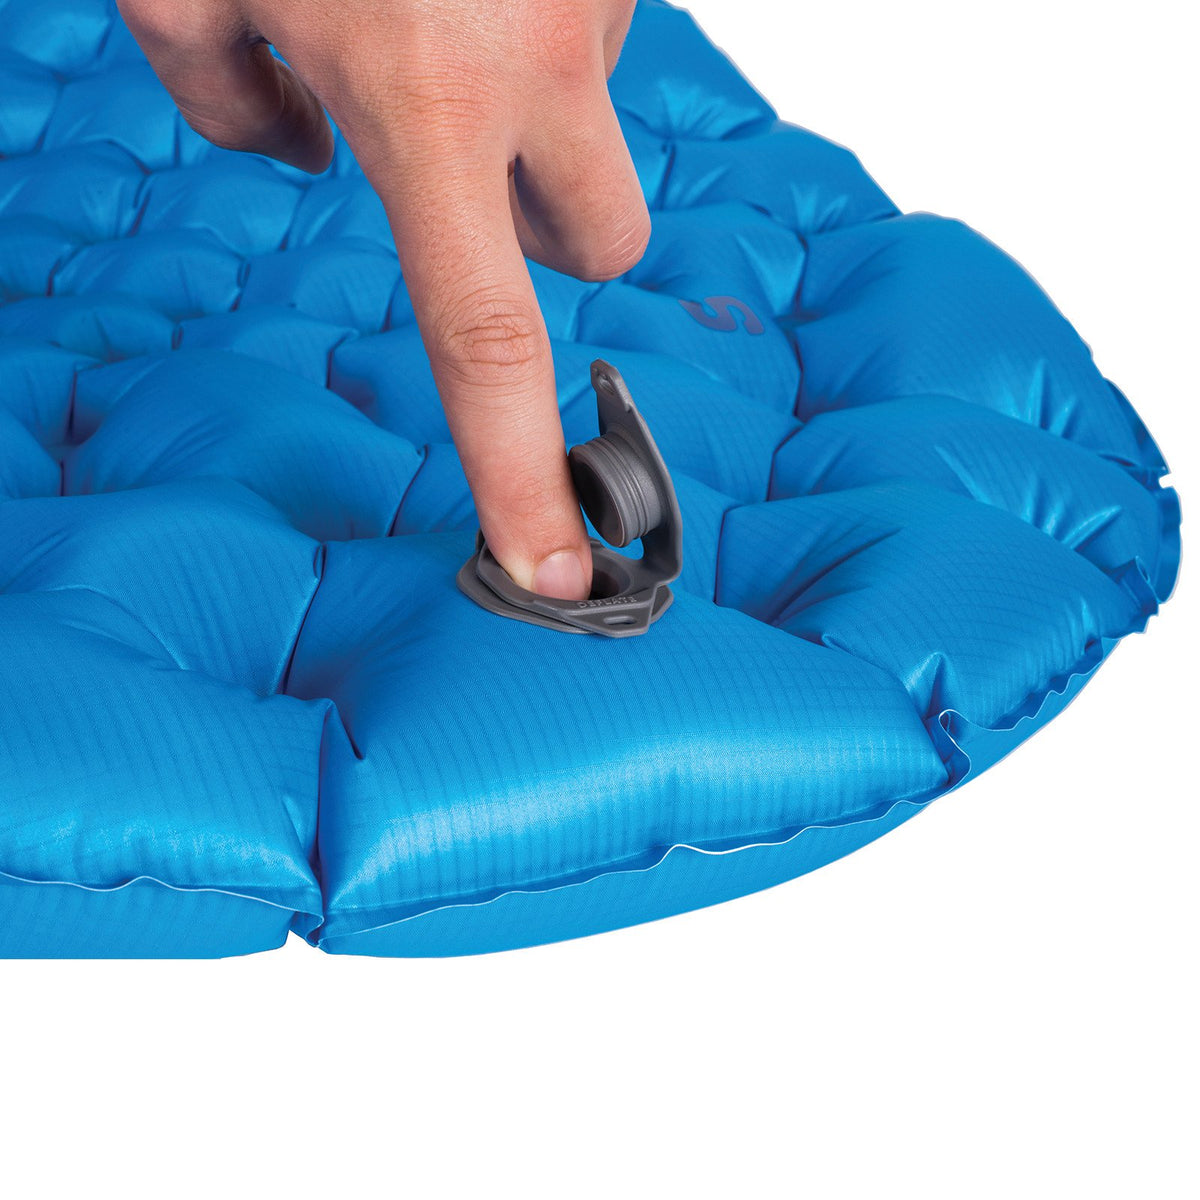 Sea to Summit UltraLight Mat showing finger pointing to inflation valve